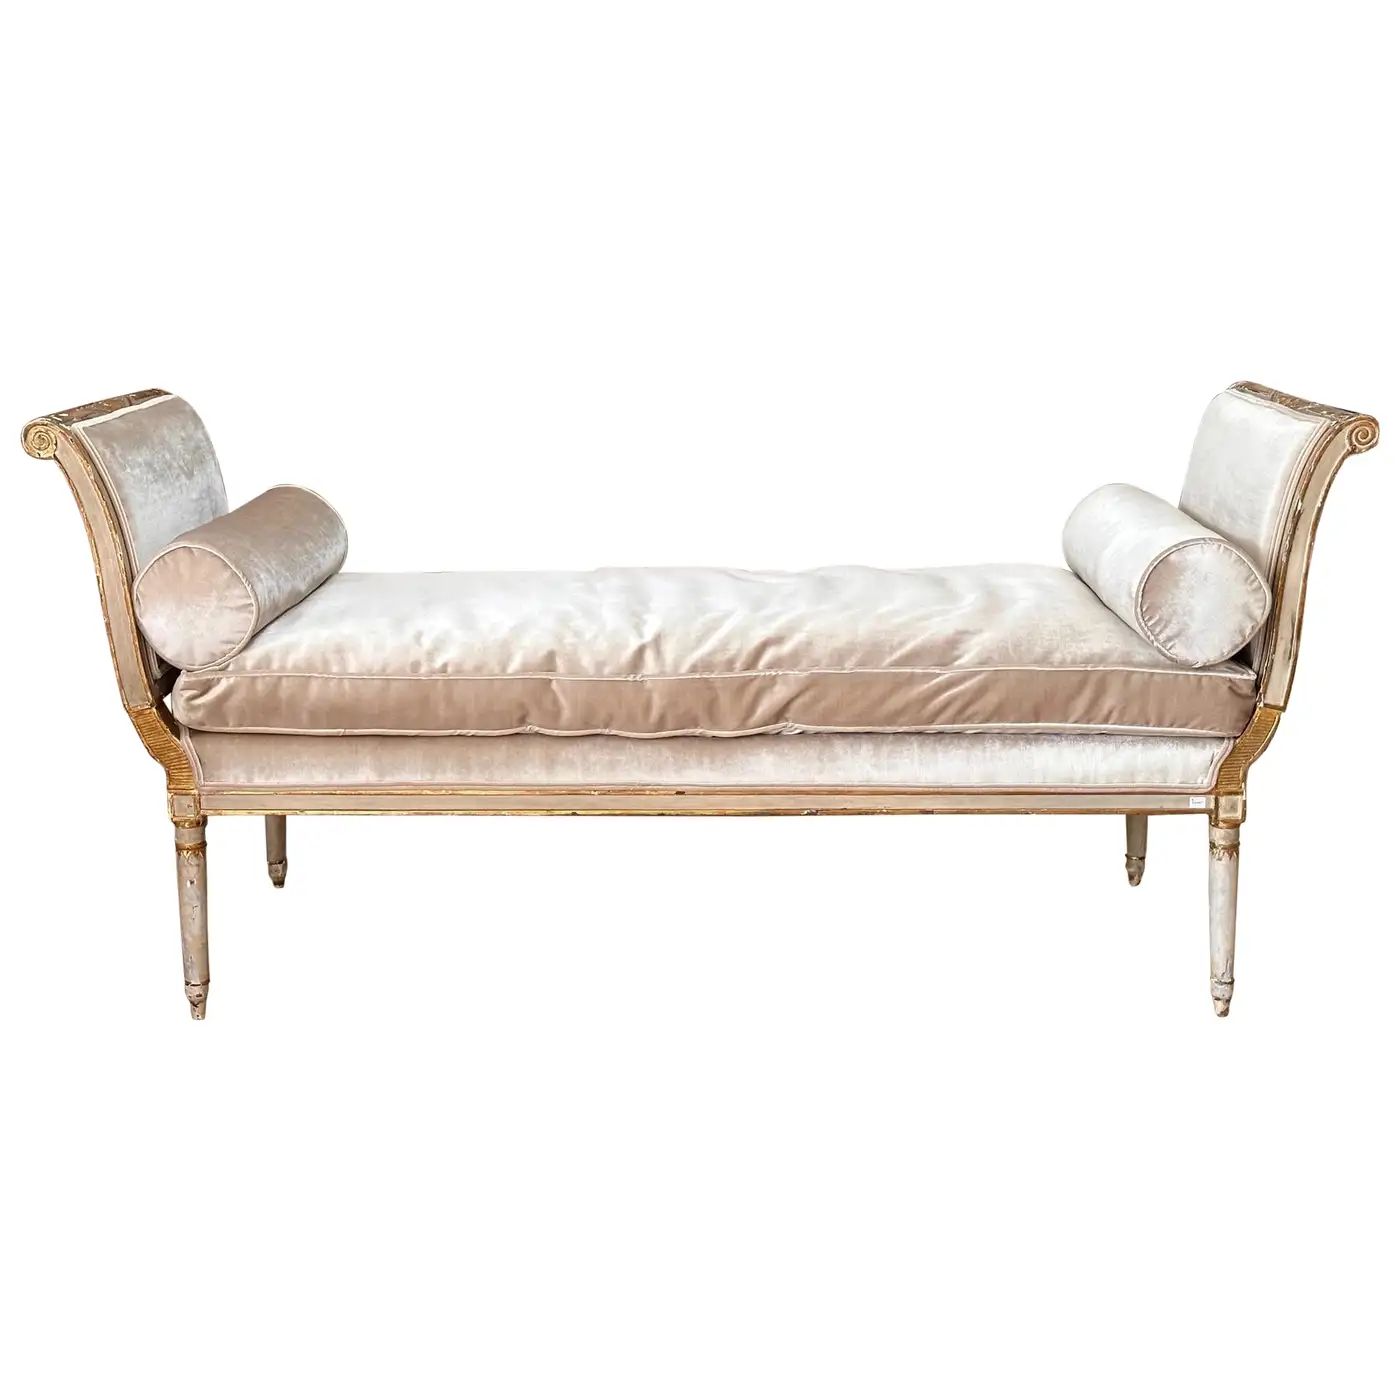 French Louis XV Style Daybed, Early 19th Century | 1stDibs